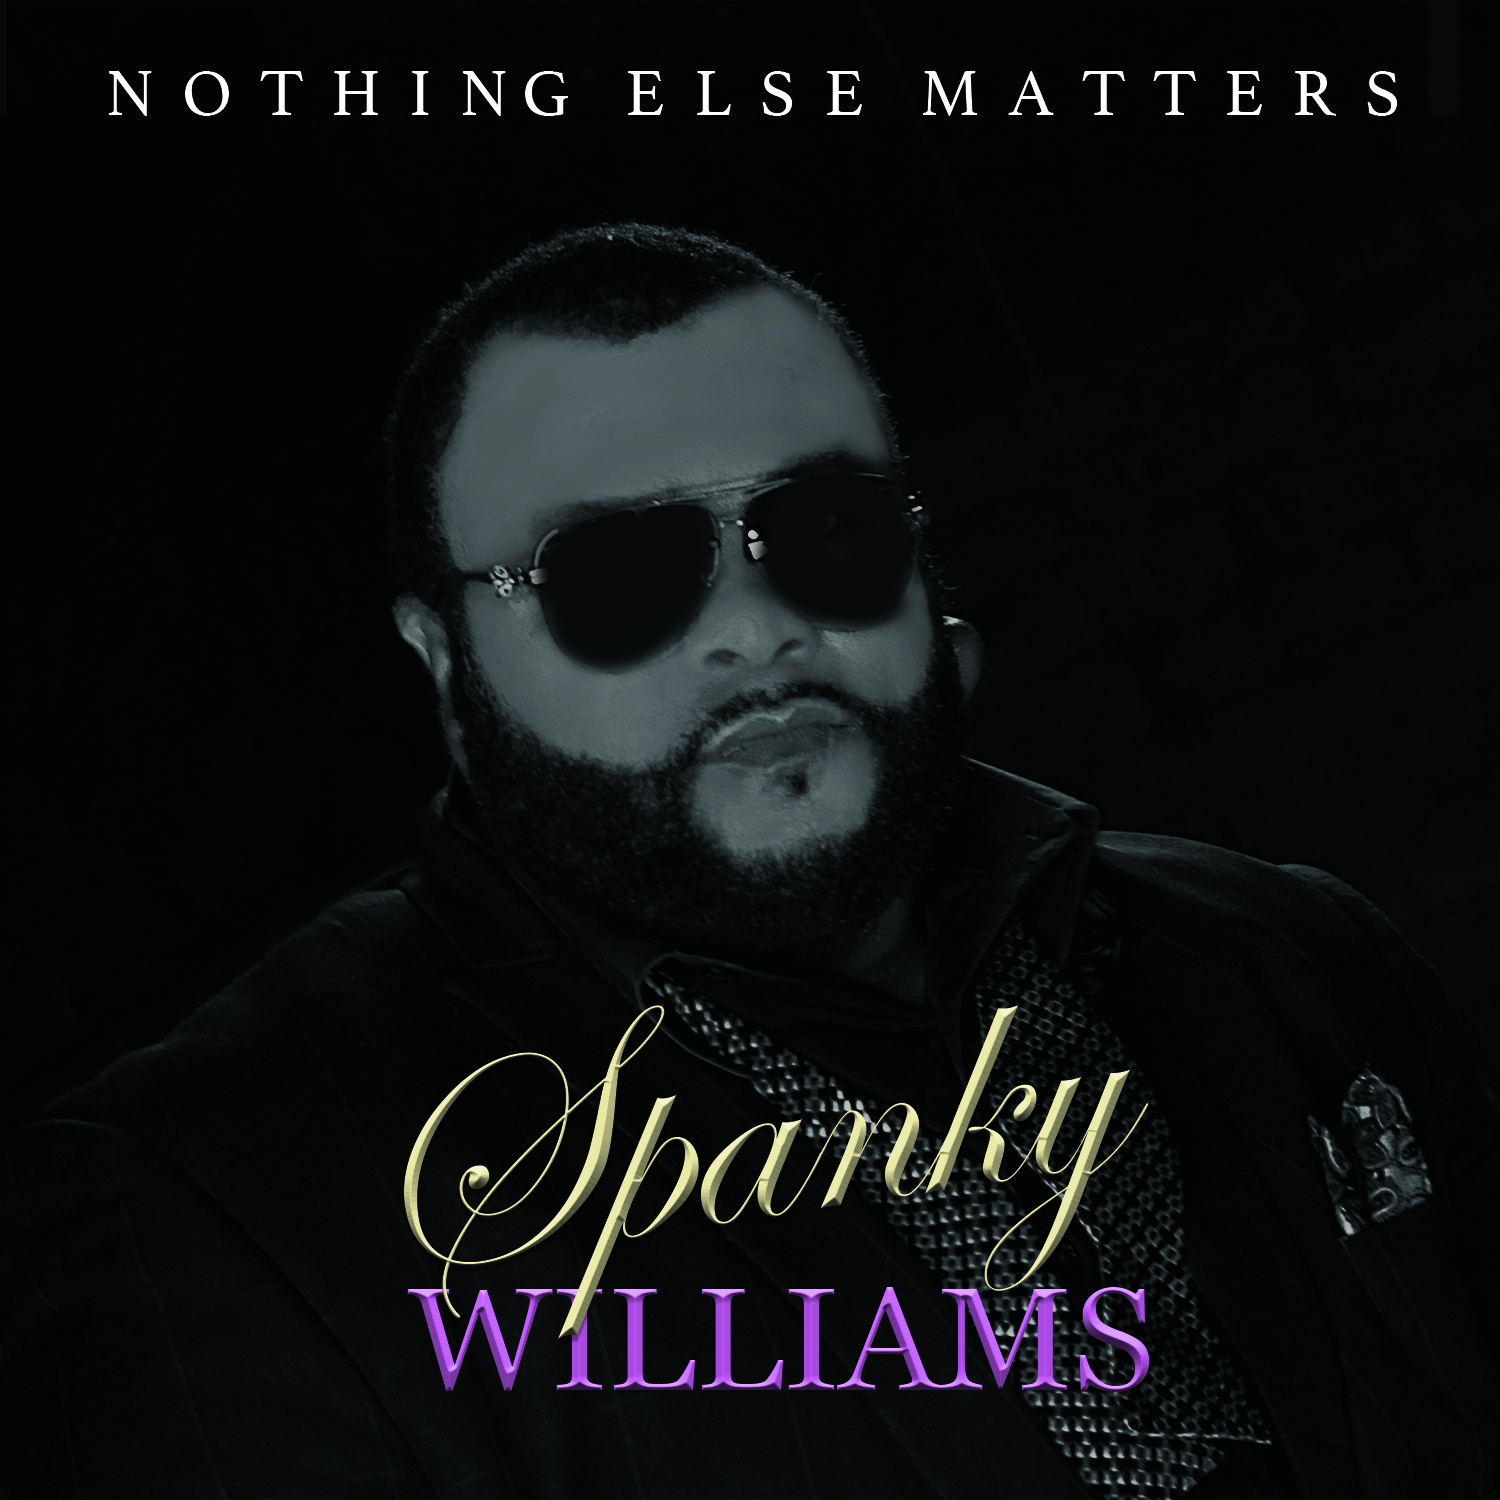 Spanky Williams - Nothing Else Matters